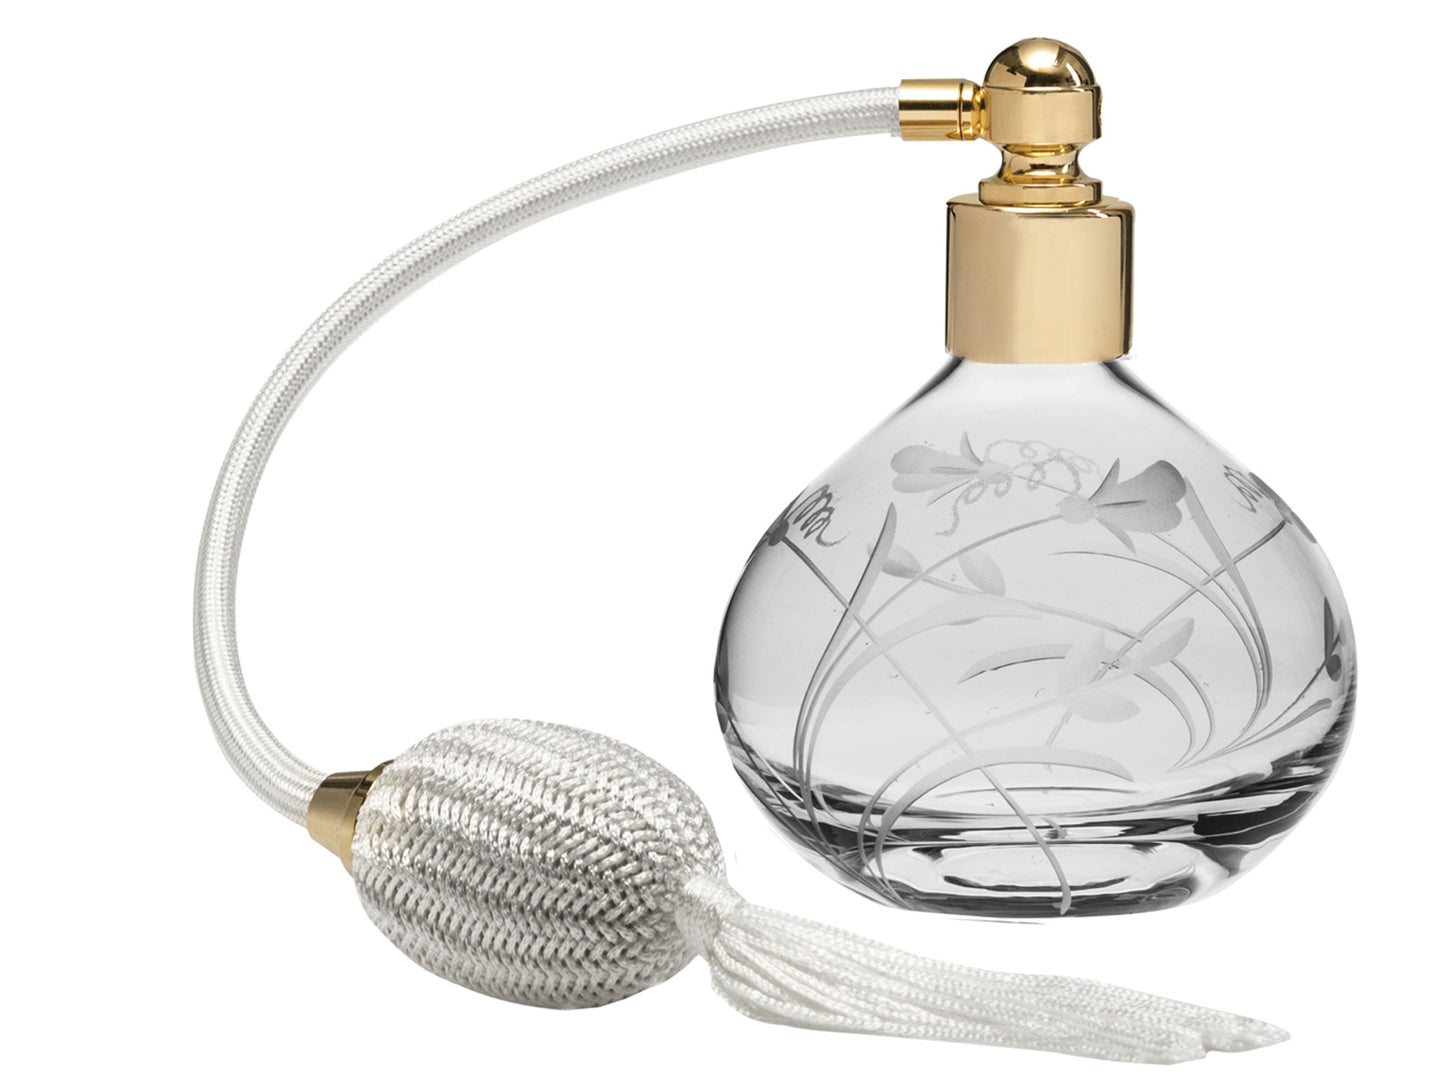 A round crystal perfume atomiser with a delicate sweet pea design engraved into the glass bottle, completed with a cream puffer